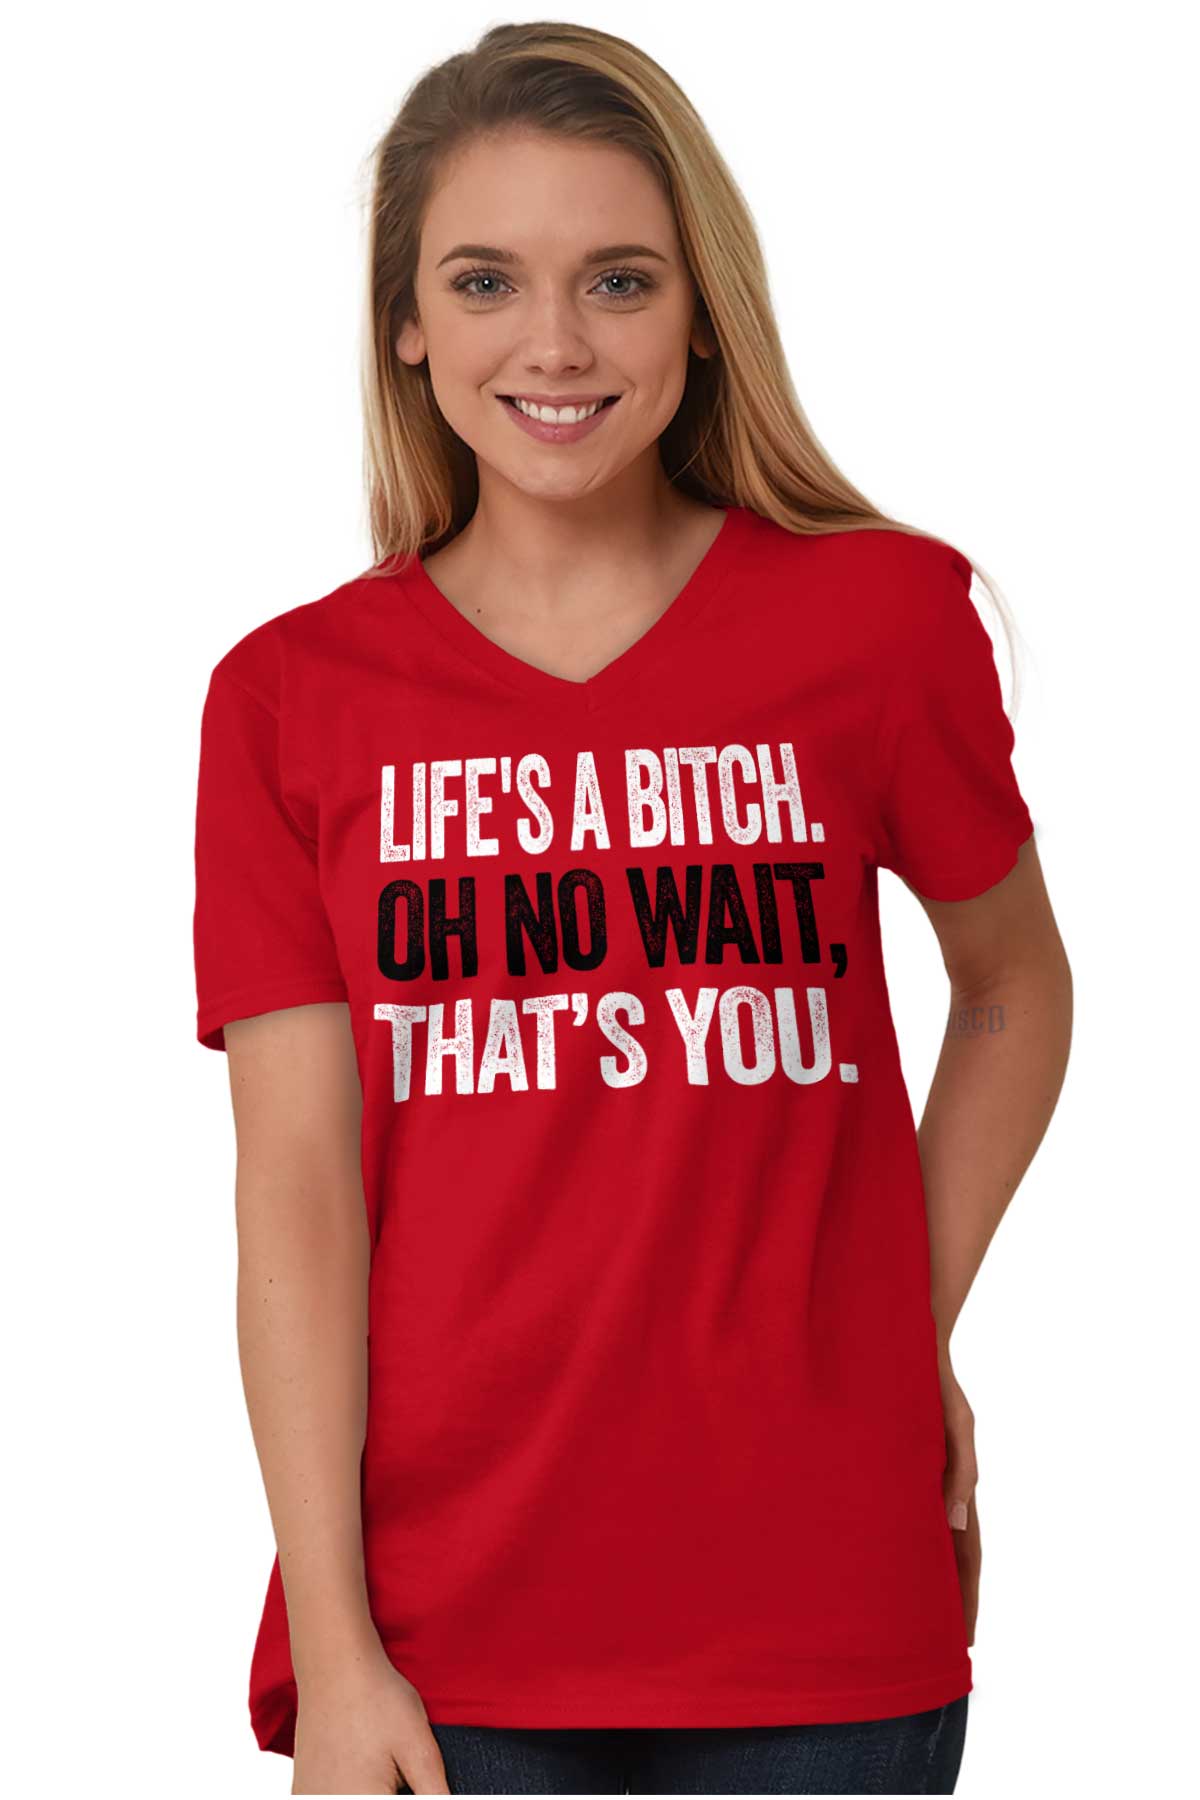 Lifes A Bitch Funny Rude Offensive Mean Funny Adult V Neck Short Sleeve T Shirts Ebay